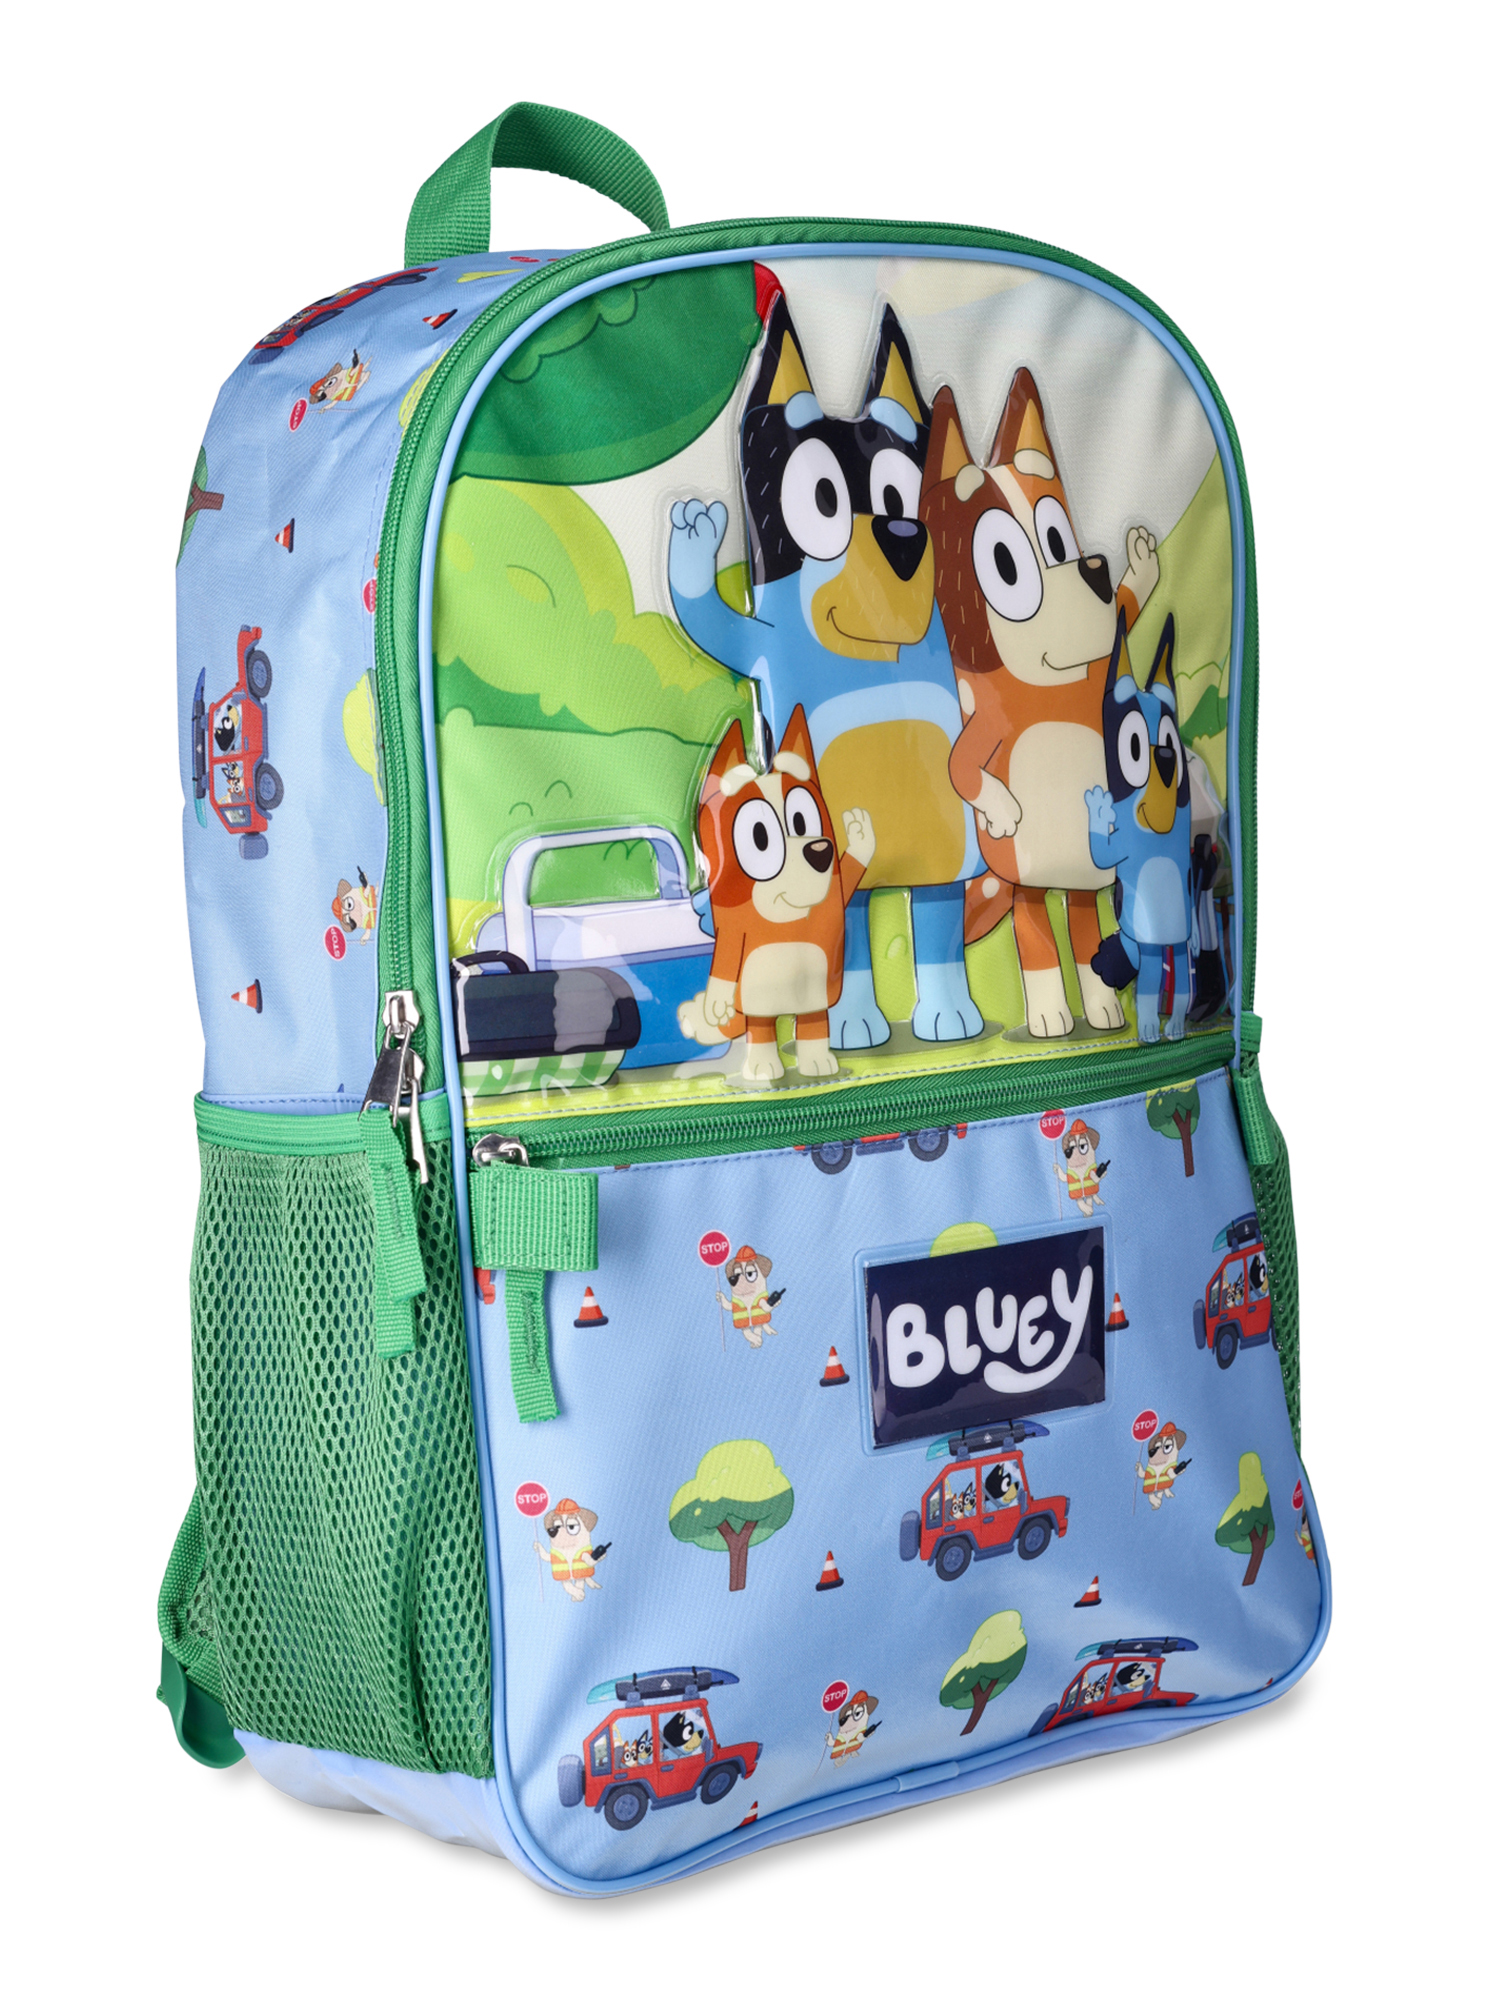 BBC Bluey Family Trip Children’s Laptop Backpack with Lunch Bag, 2-Piece Set - image 5 of 8